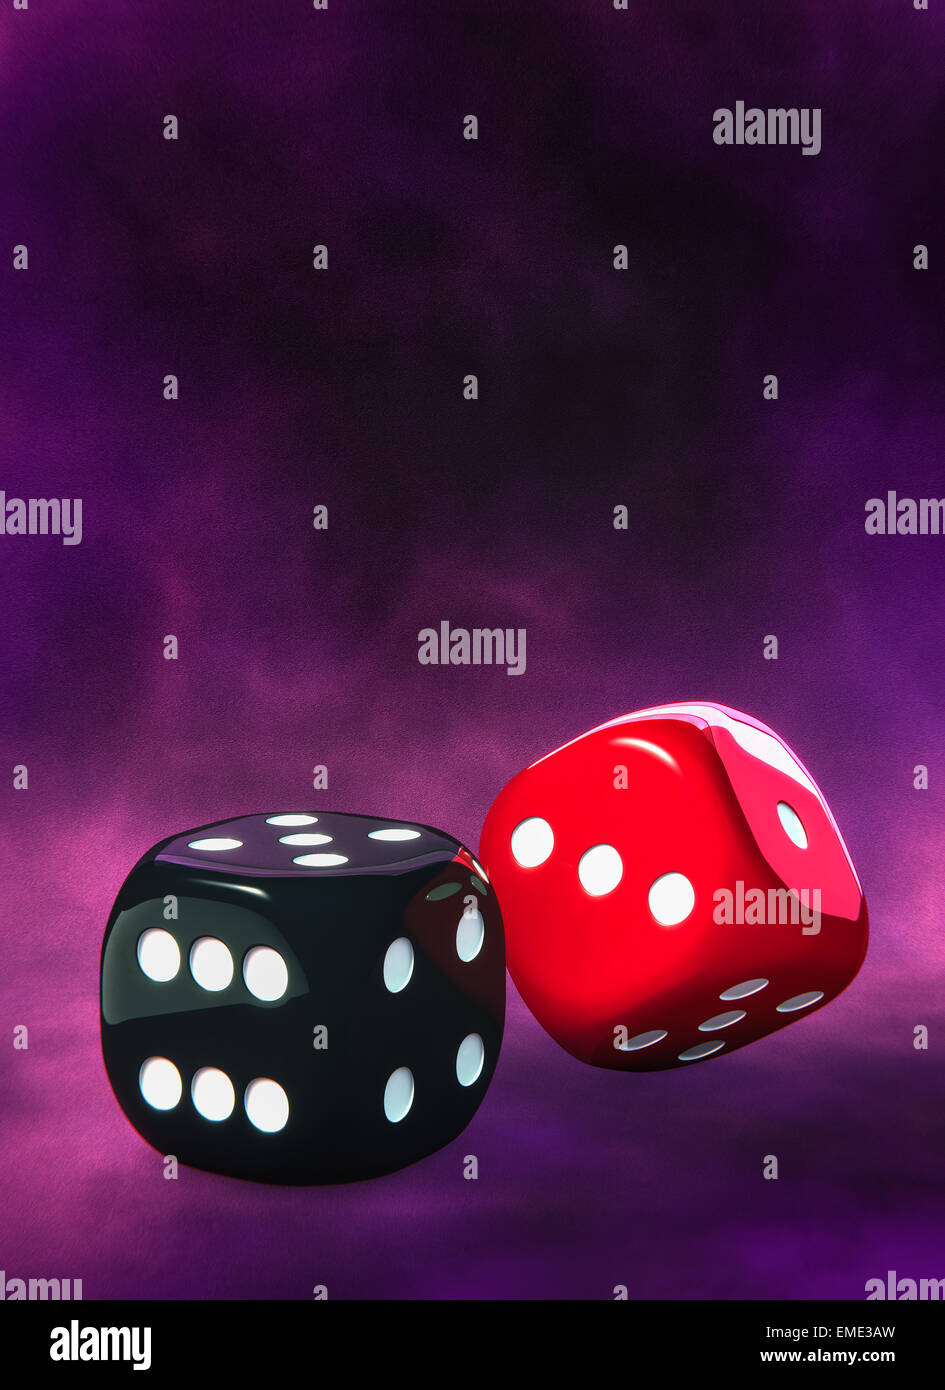 Black and red dice gamble Stock Photo